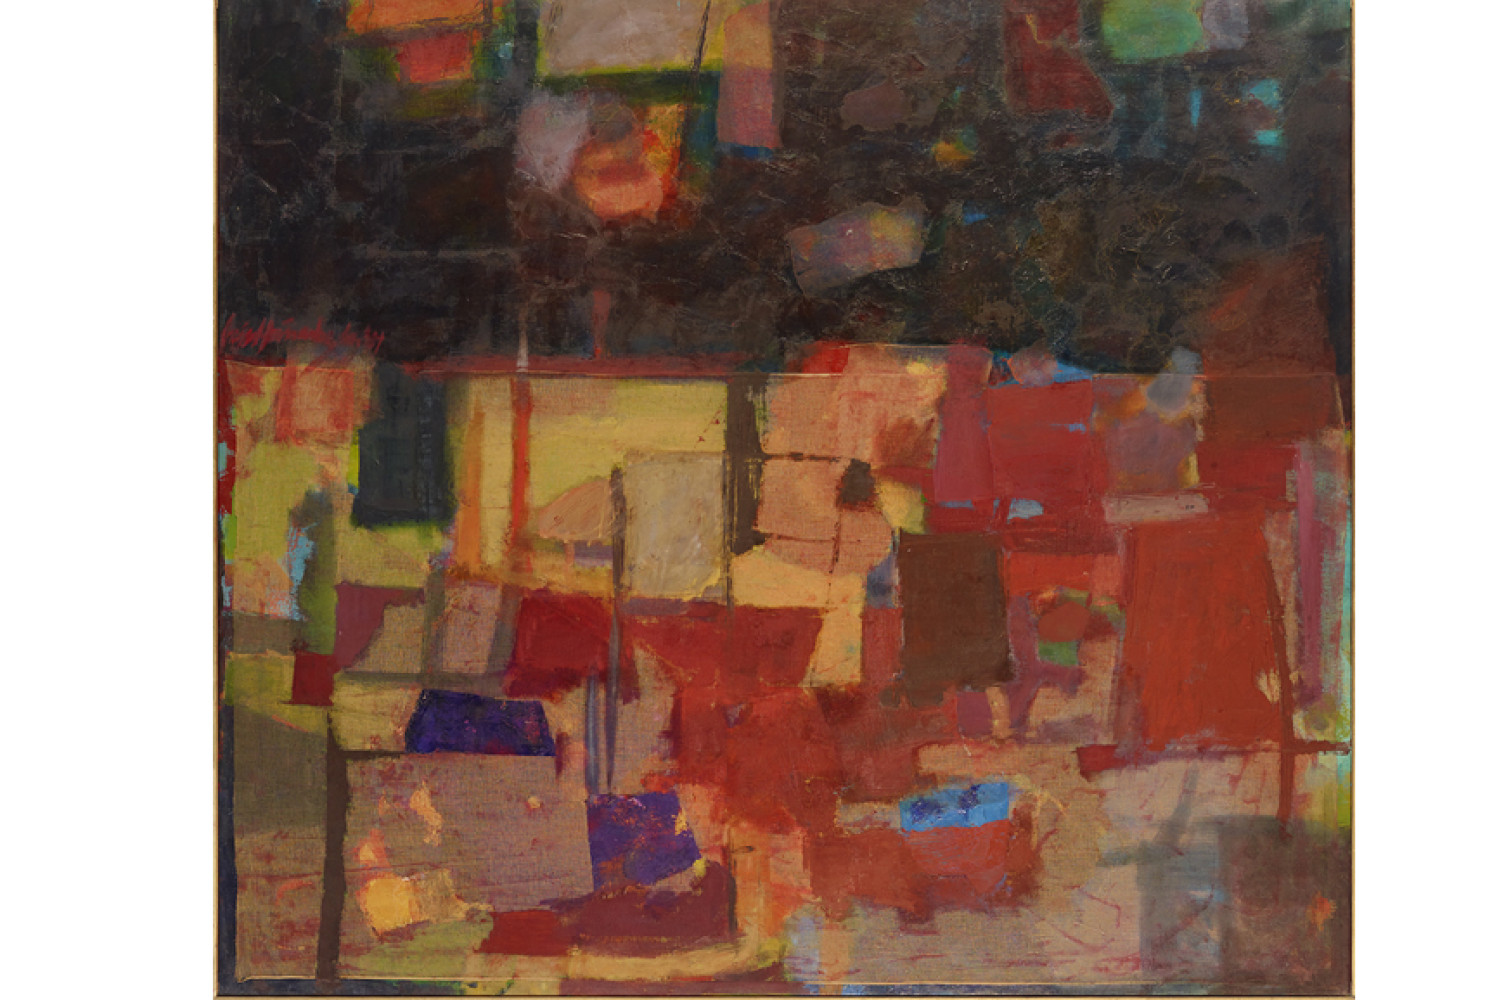 Subsuelo (Subsoil), 1964, by Luis Hernández Cruz (Puerto Rican, b, 1936); Oil and collage on canvas; 60 1/2 x 69 5/8 inches. Courtesy of the Lowe Art Museum, University of Miami. © 1964 Luis Hernández Cruz.